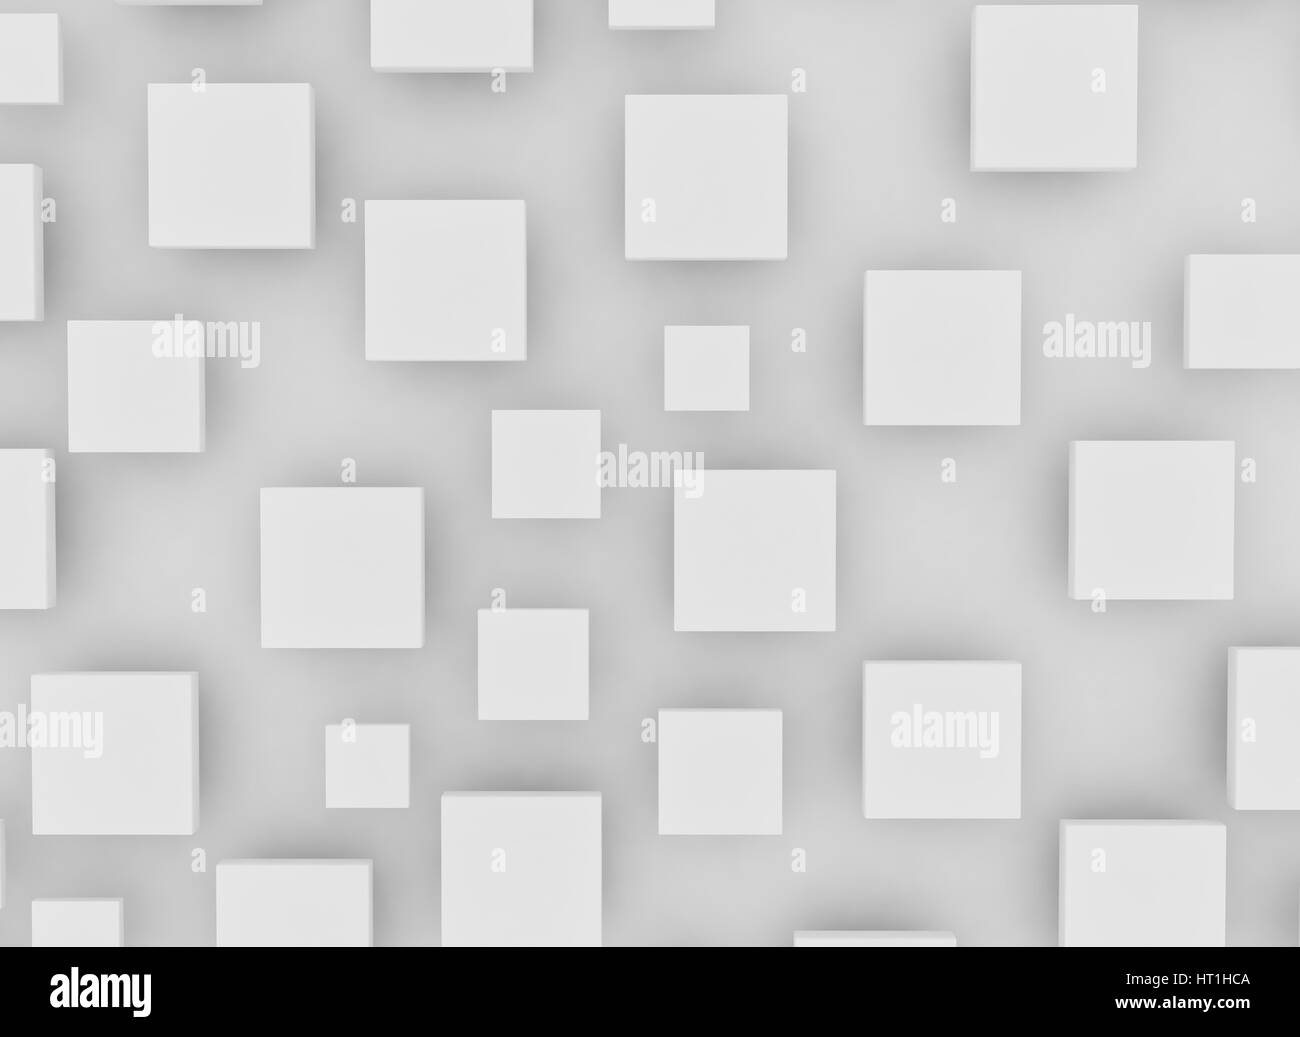 Blank white squares and shadow Stock Photo